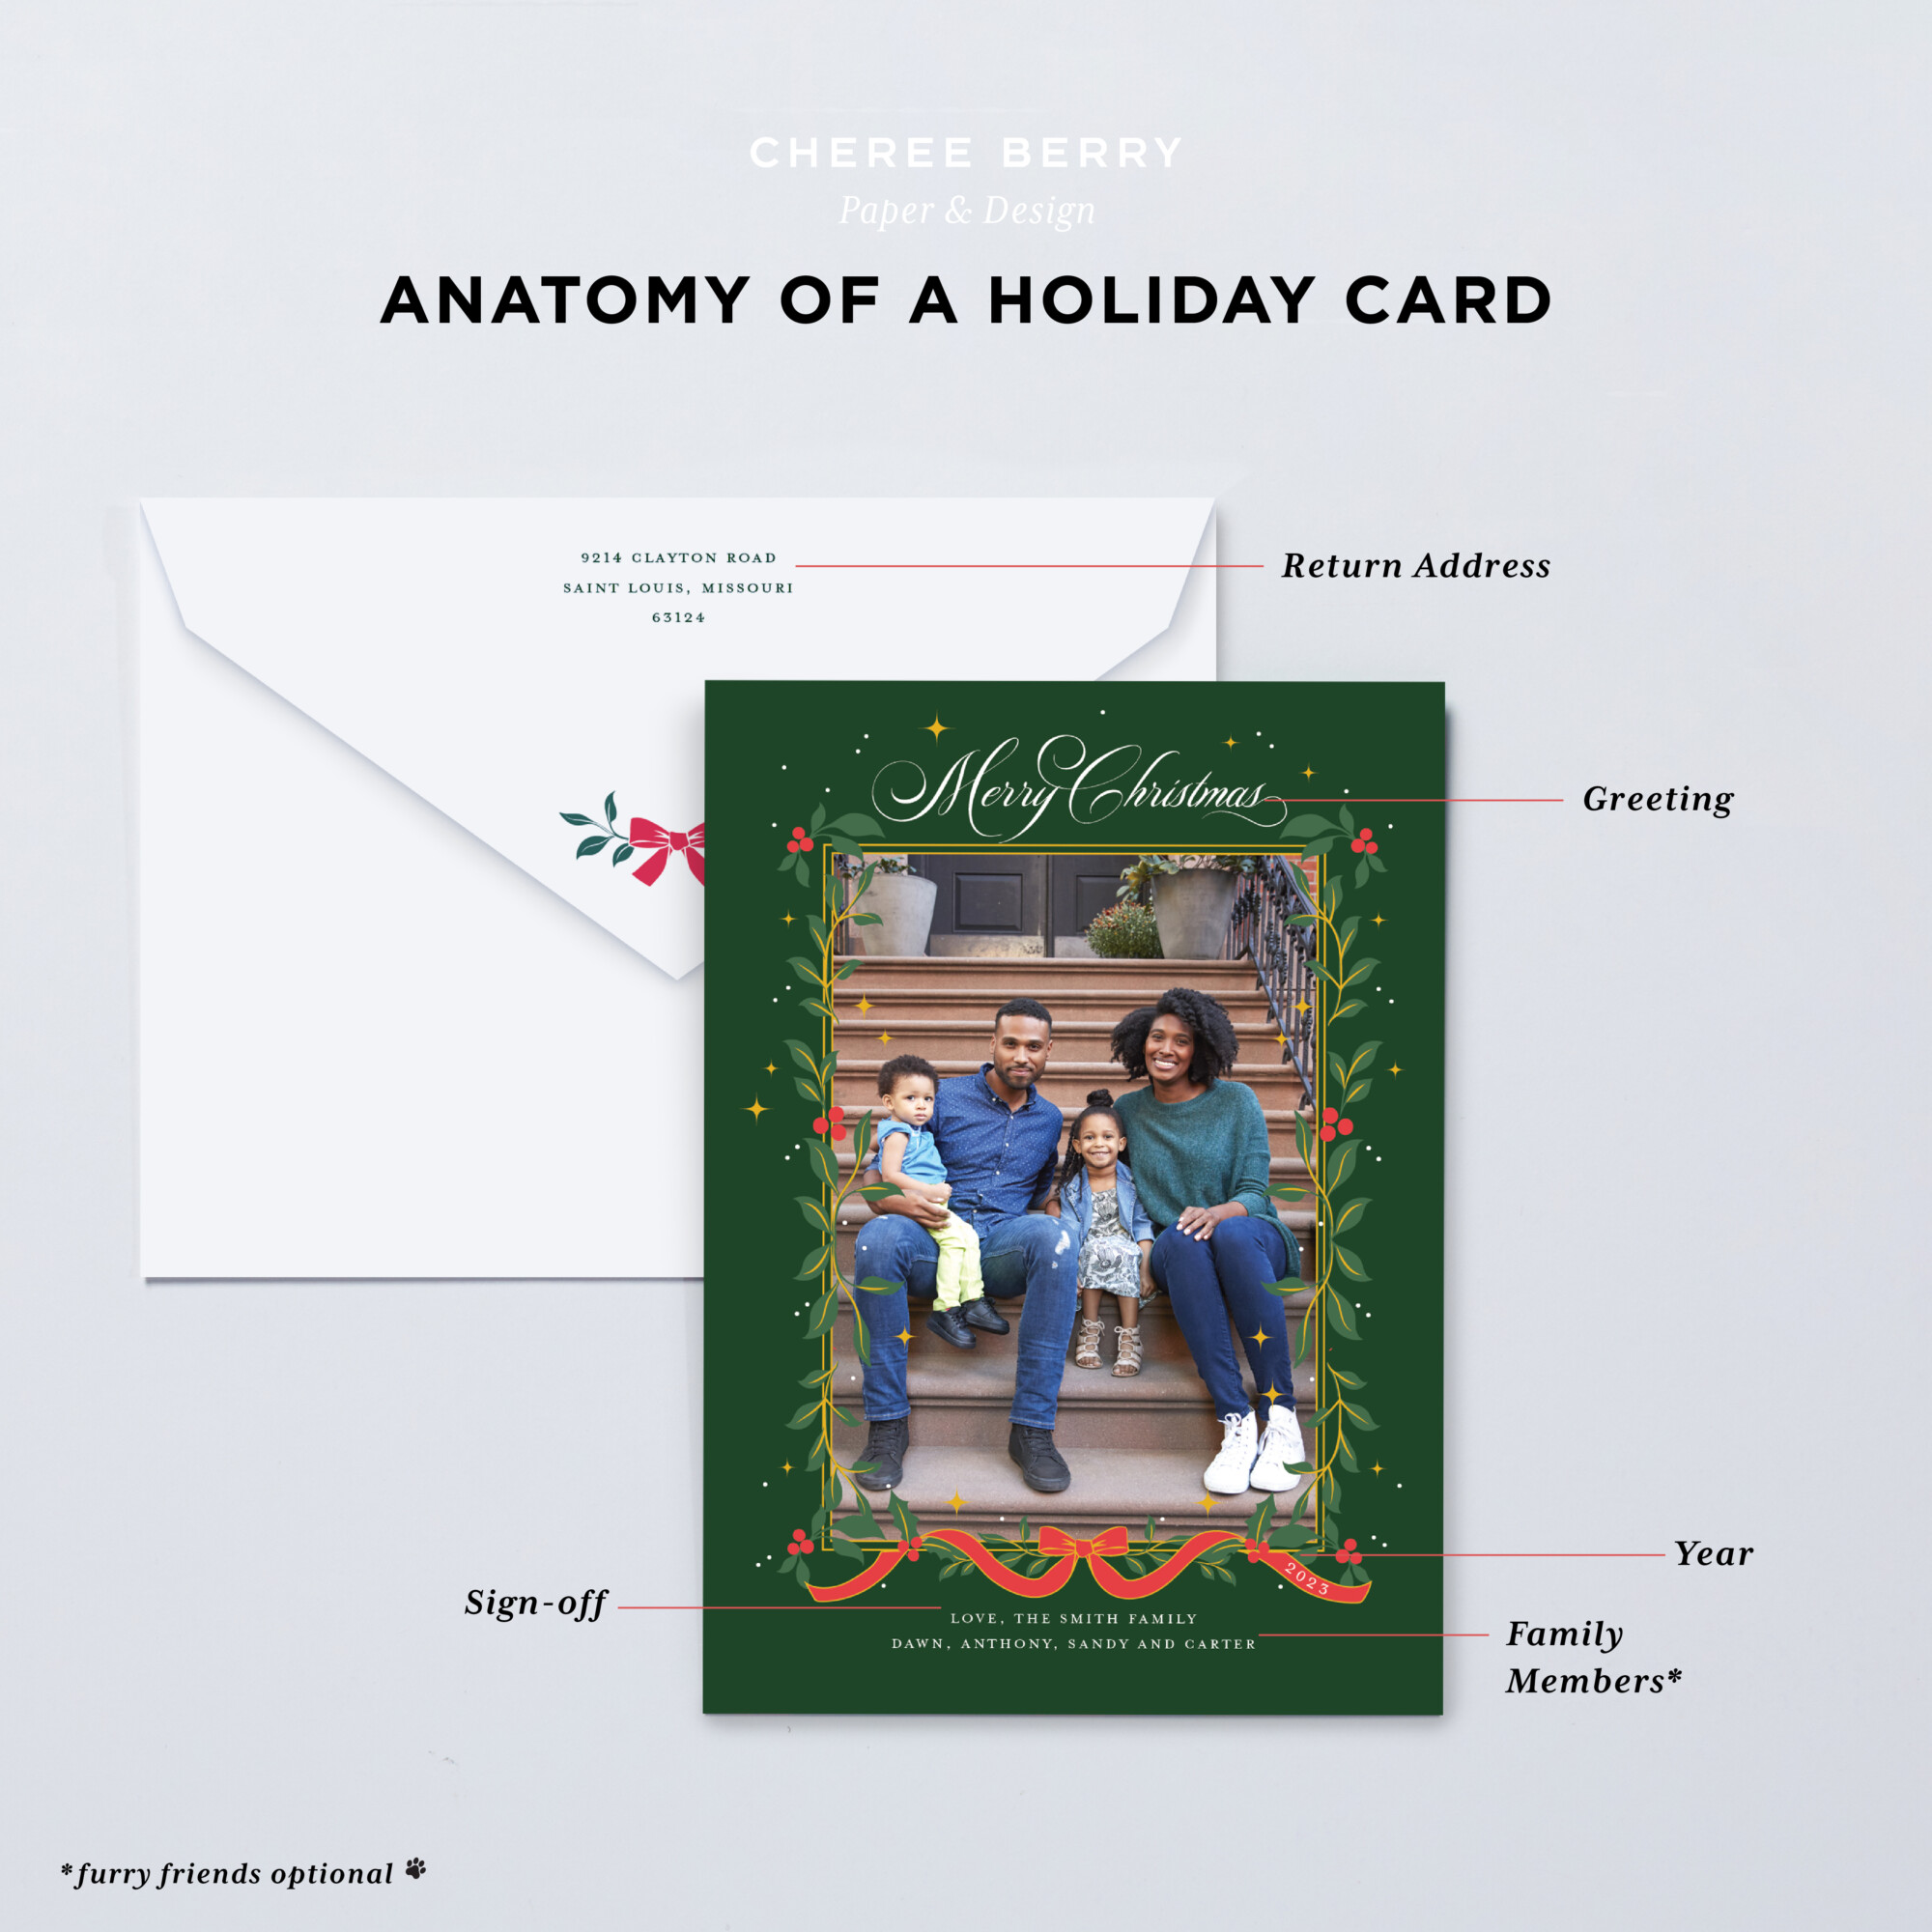 Diagram showing the parts of a holiday card: Return Address, Greeting, Year, Sign-off, and Family Members